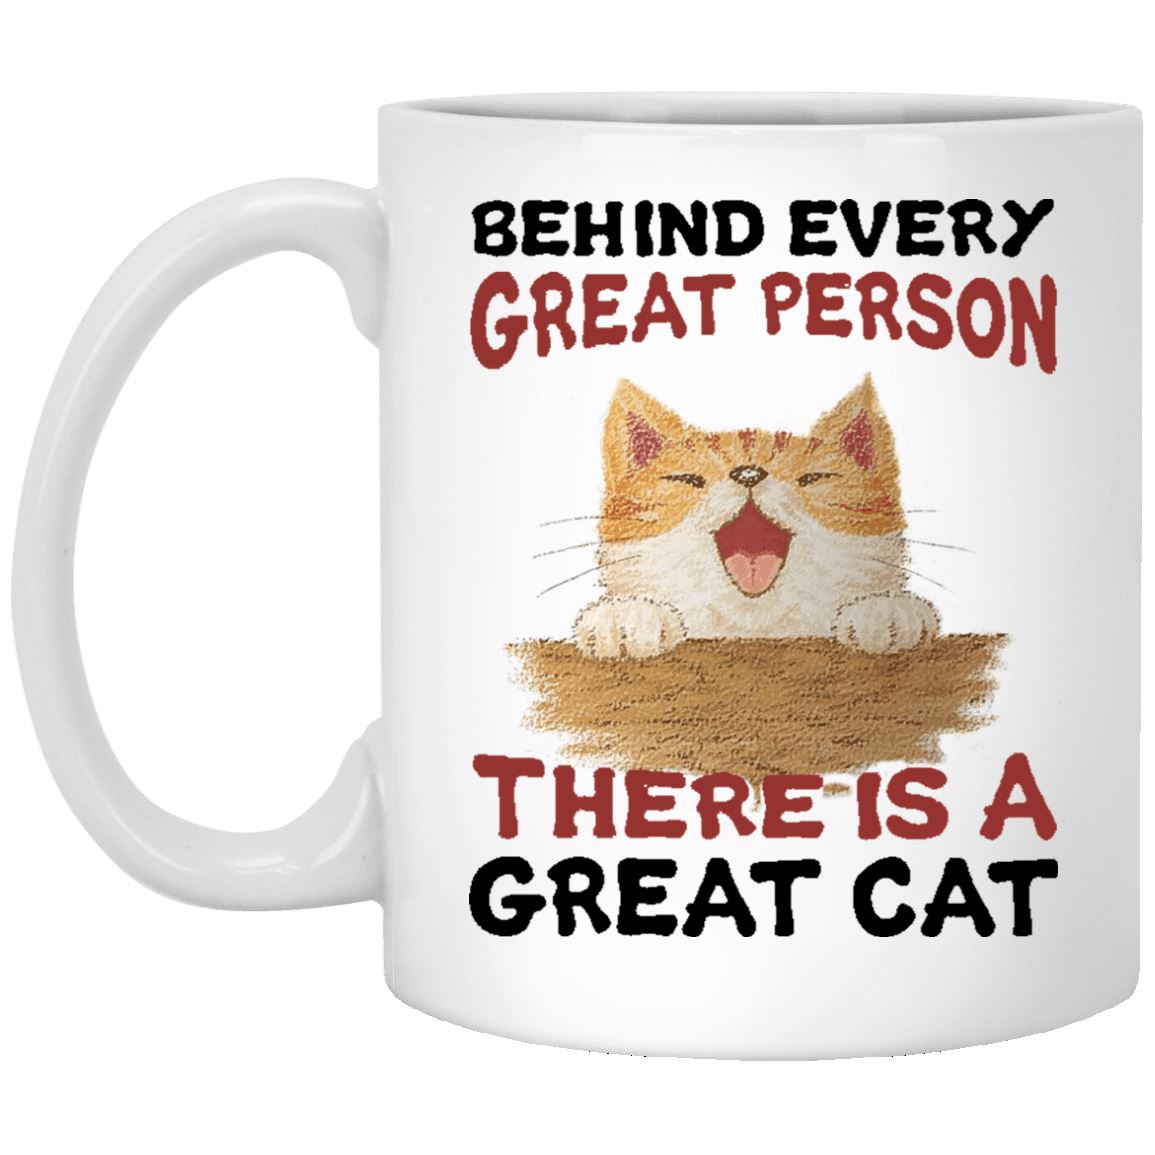 Cat Mug - Behind Every Great Person - CatsForLife